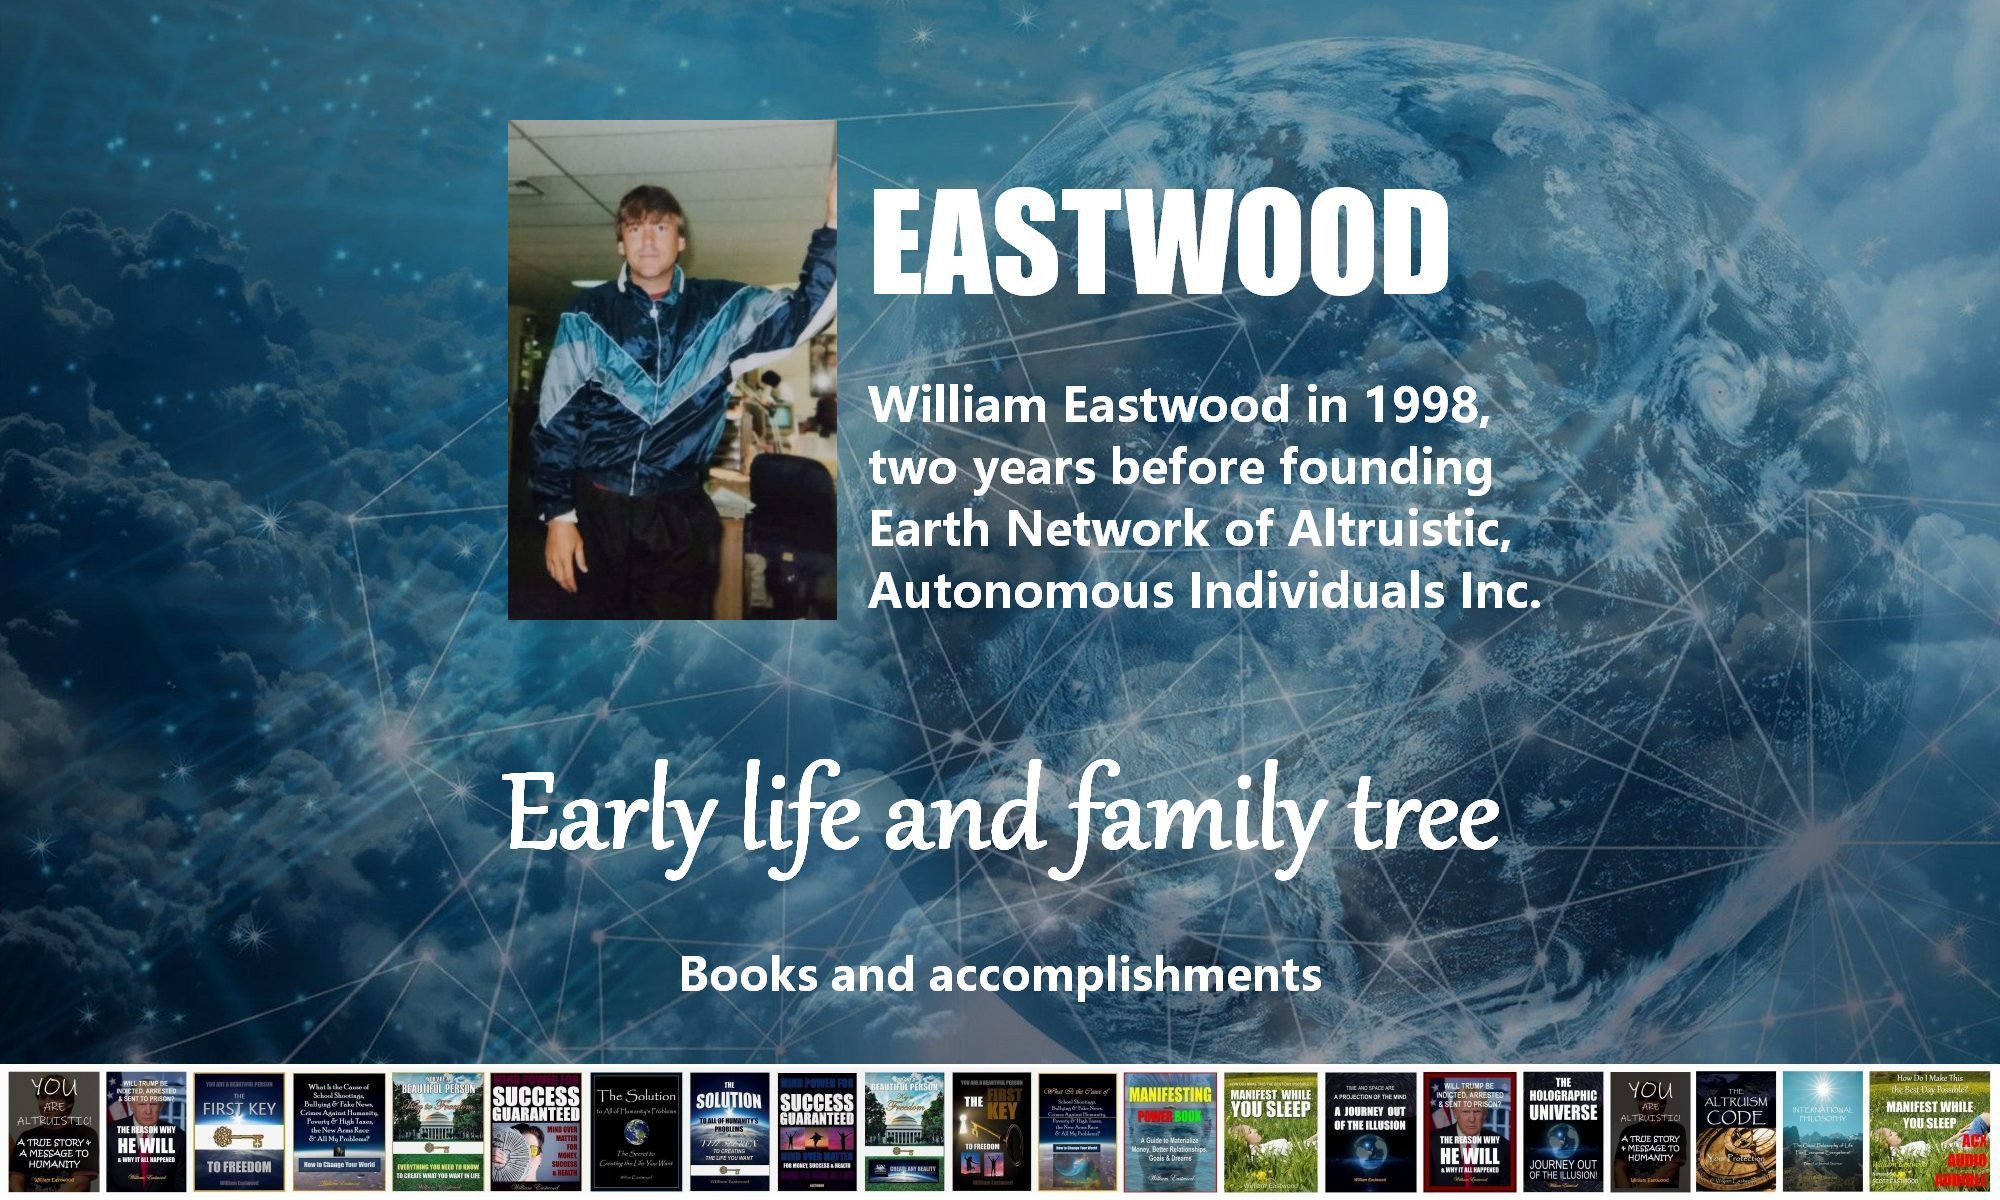 William Eastwood American author family tree early life books and accomplishments